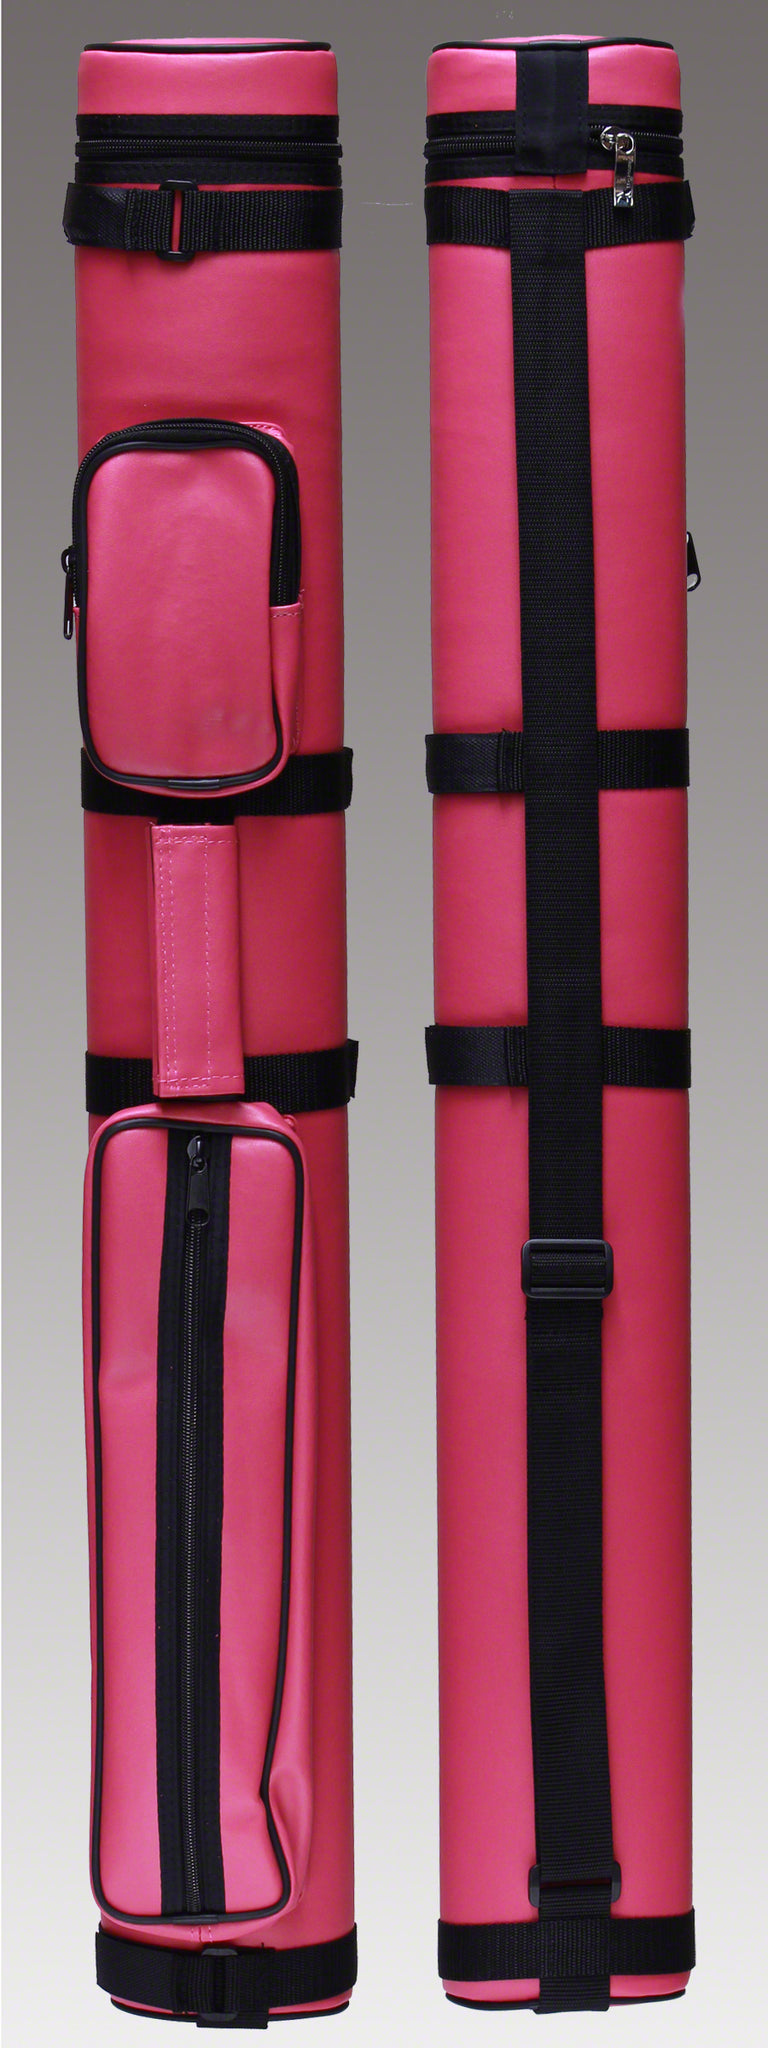 Pro Series Traditional Pink 2x2 Pool Cue Case